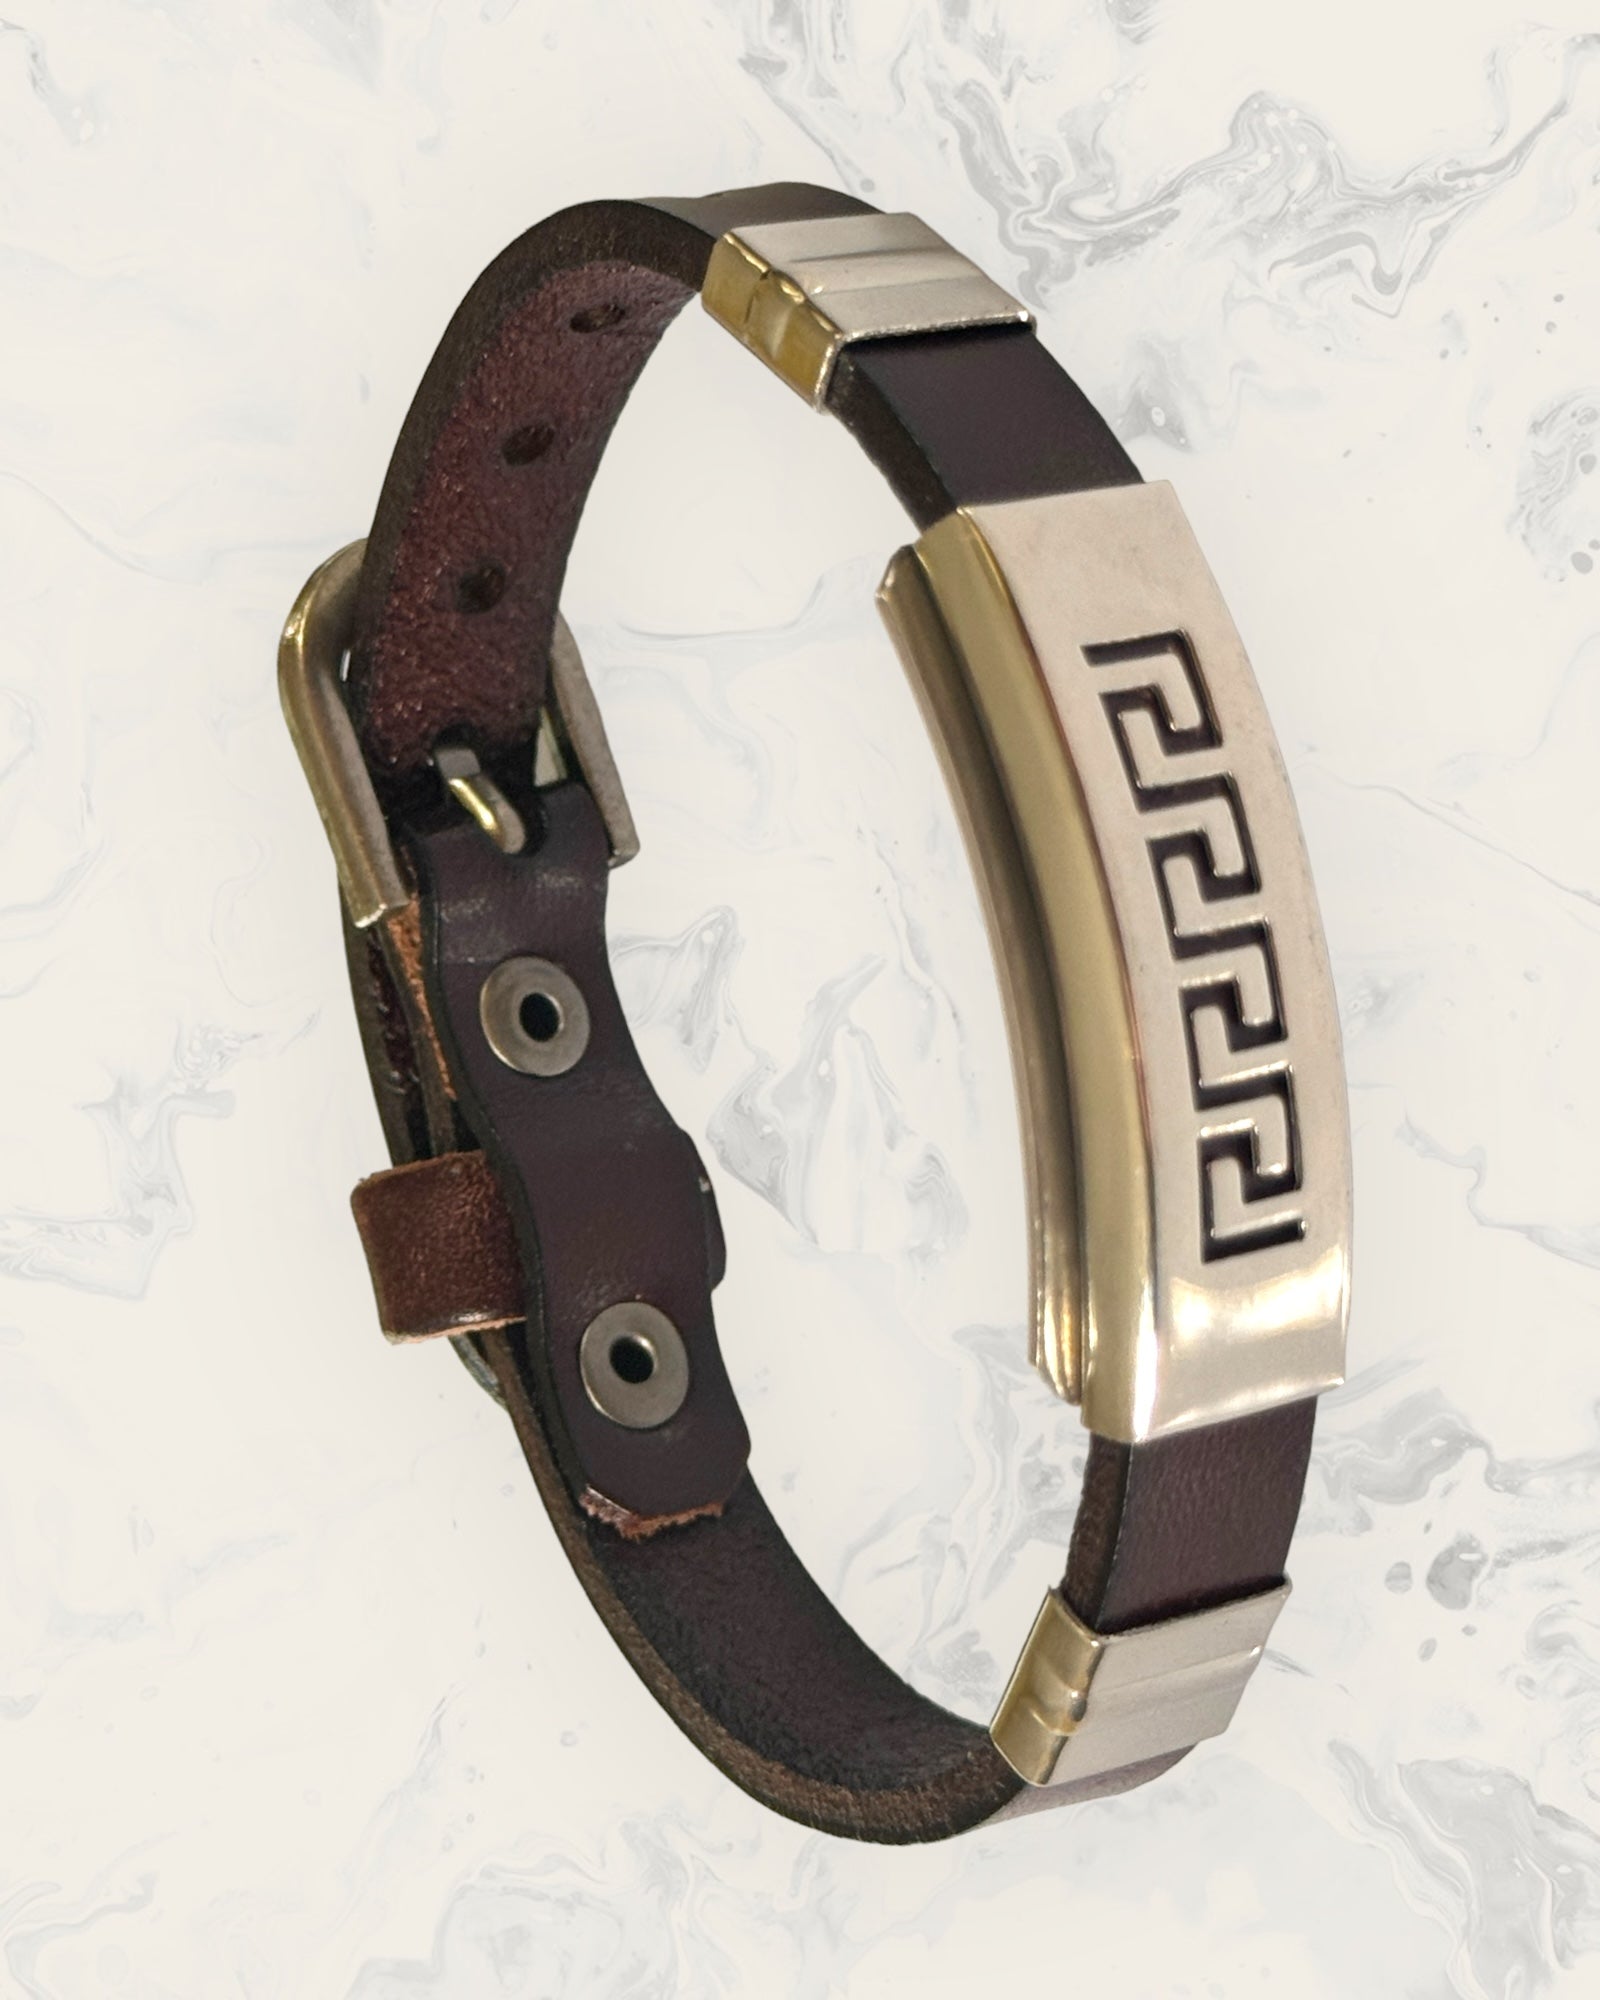 Natural Pain Relief and EMF Protection Bracelet Leather Band Color Dark Brown with Greek Key design on a silver metal slider